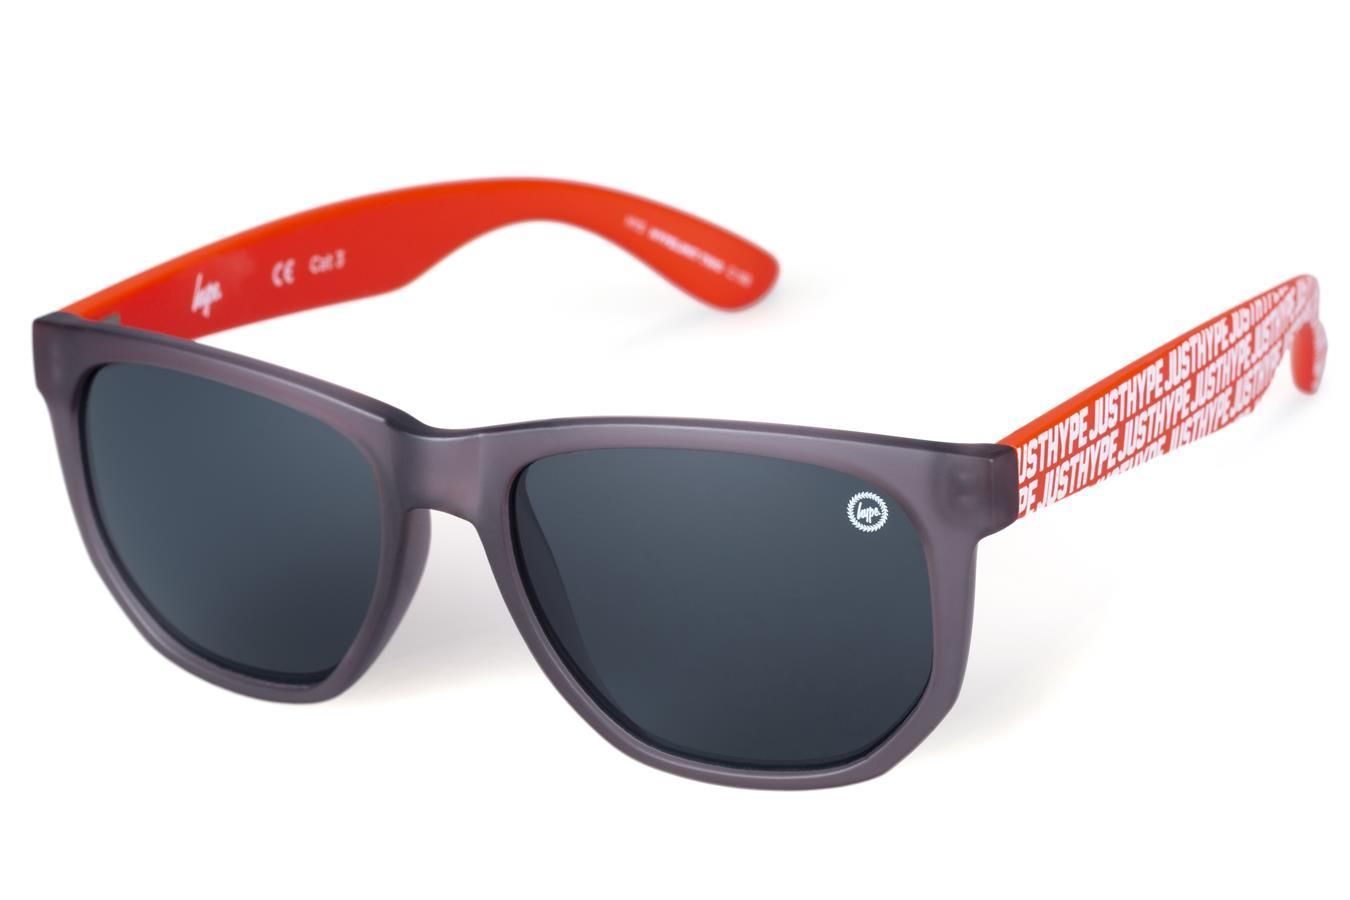 No need for hair of the dog. Disguise your hangover in our range of sunglasses.